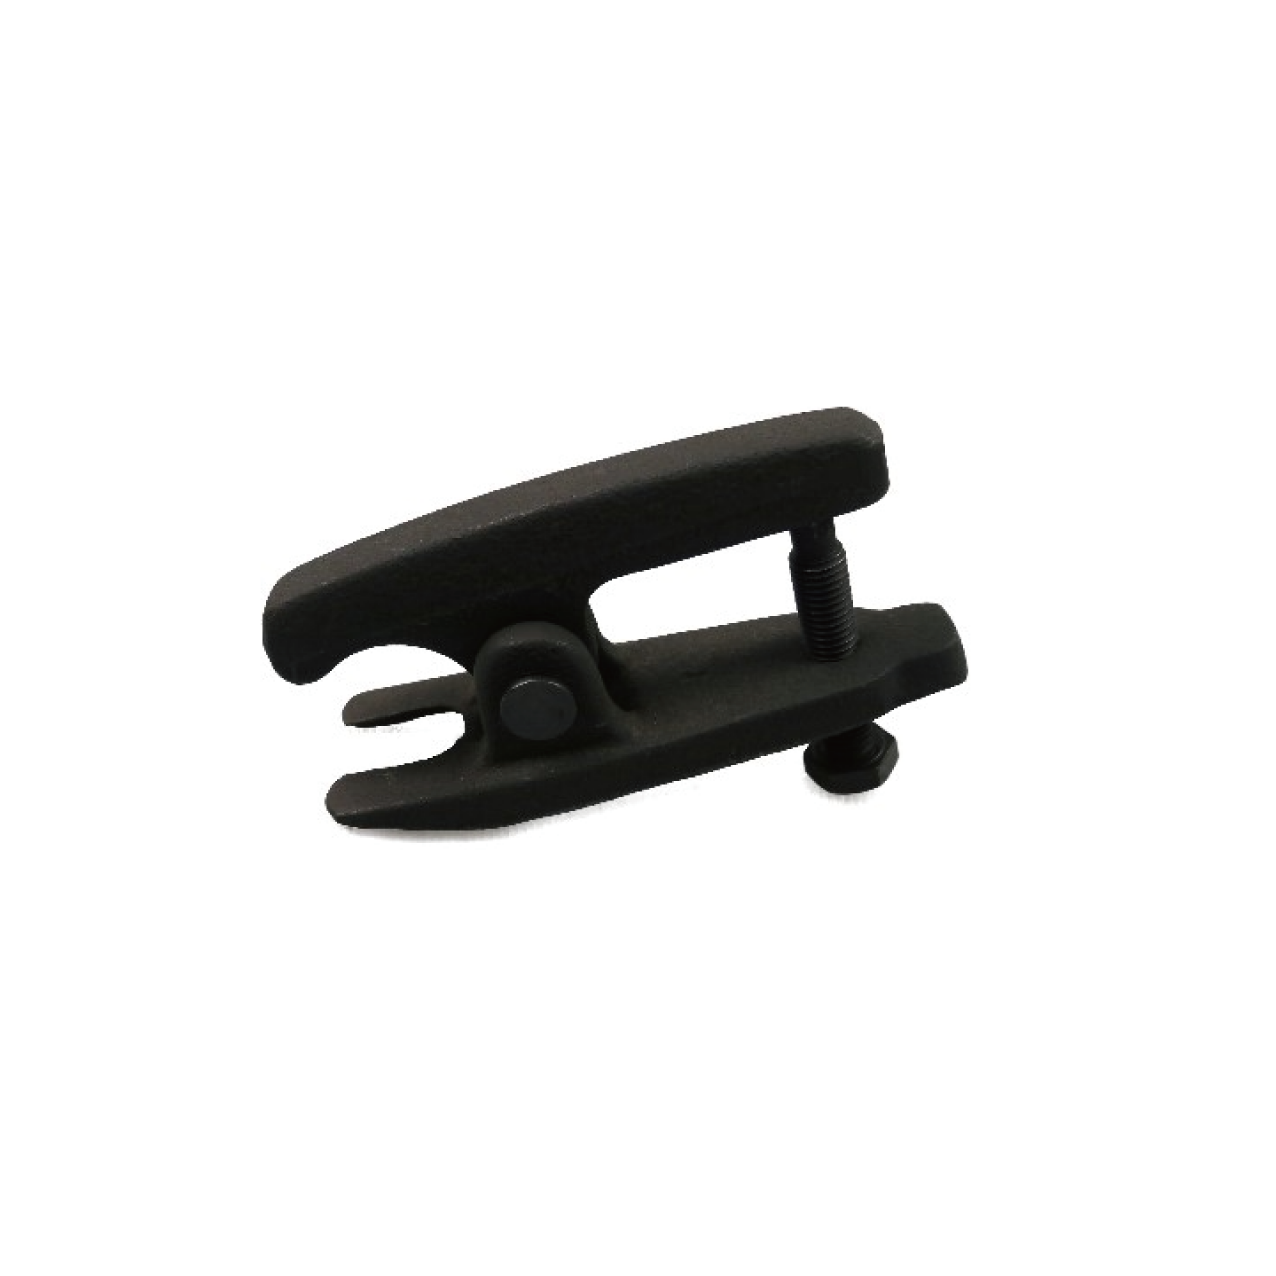 TIE ROD END LIFTER (CASTING)(19mm)